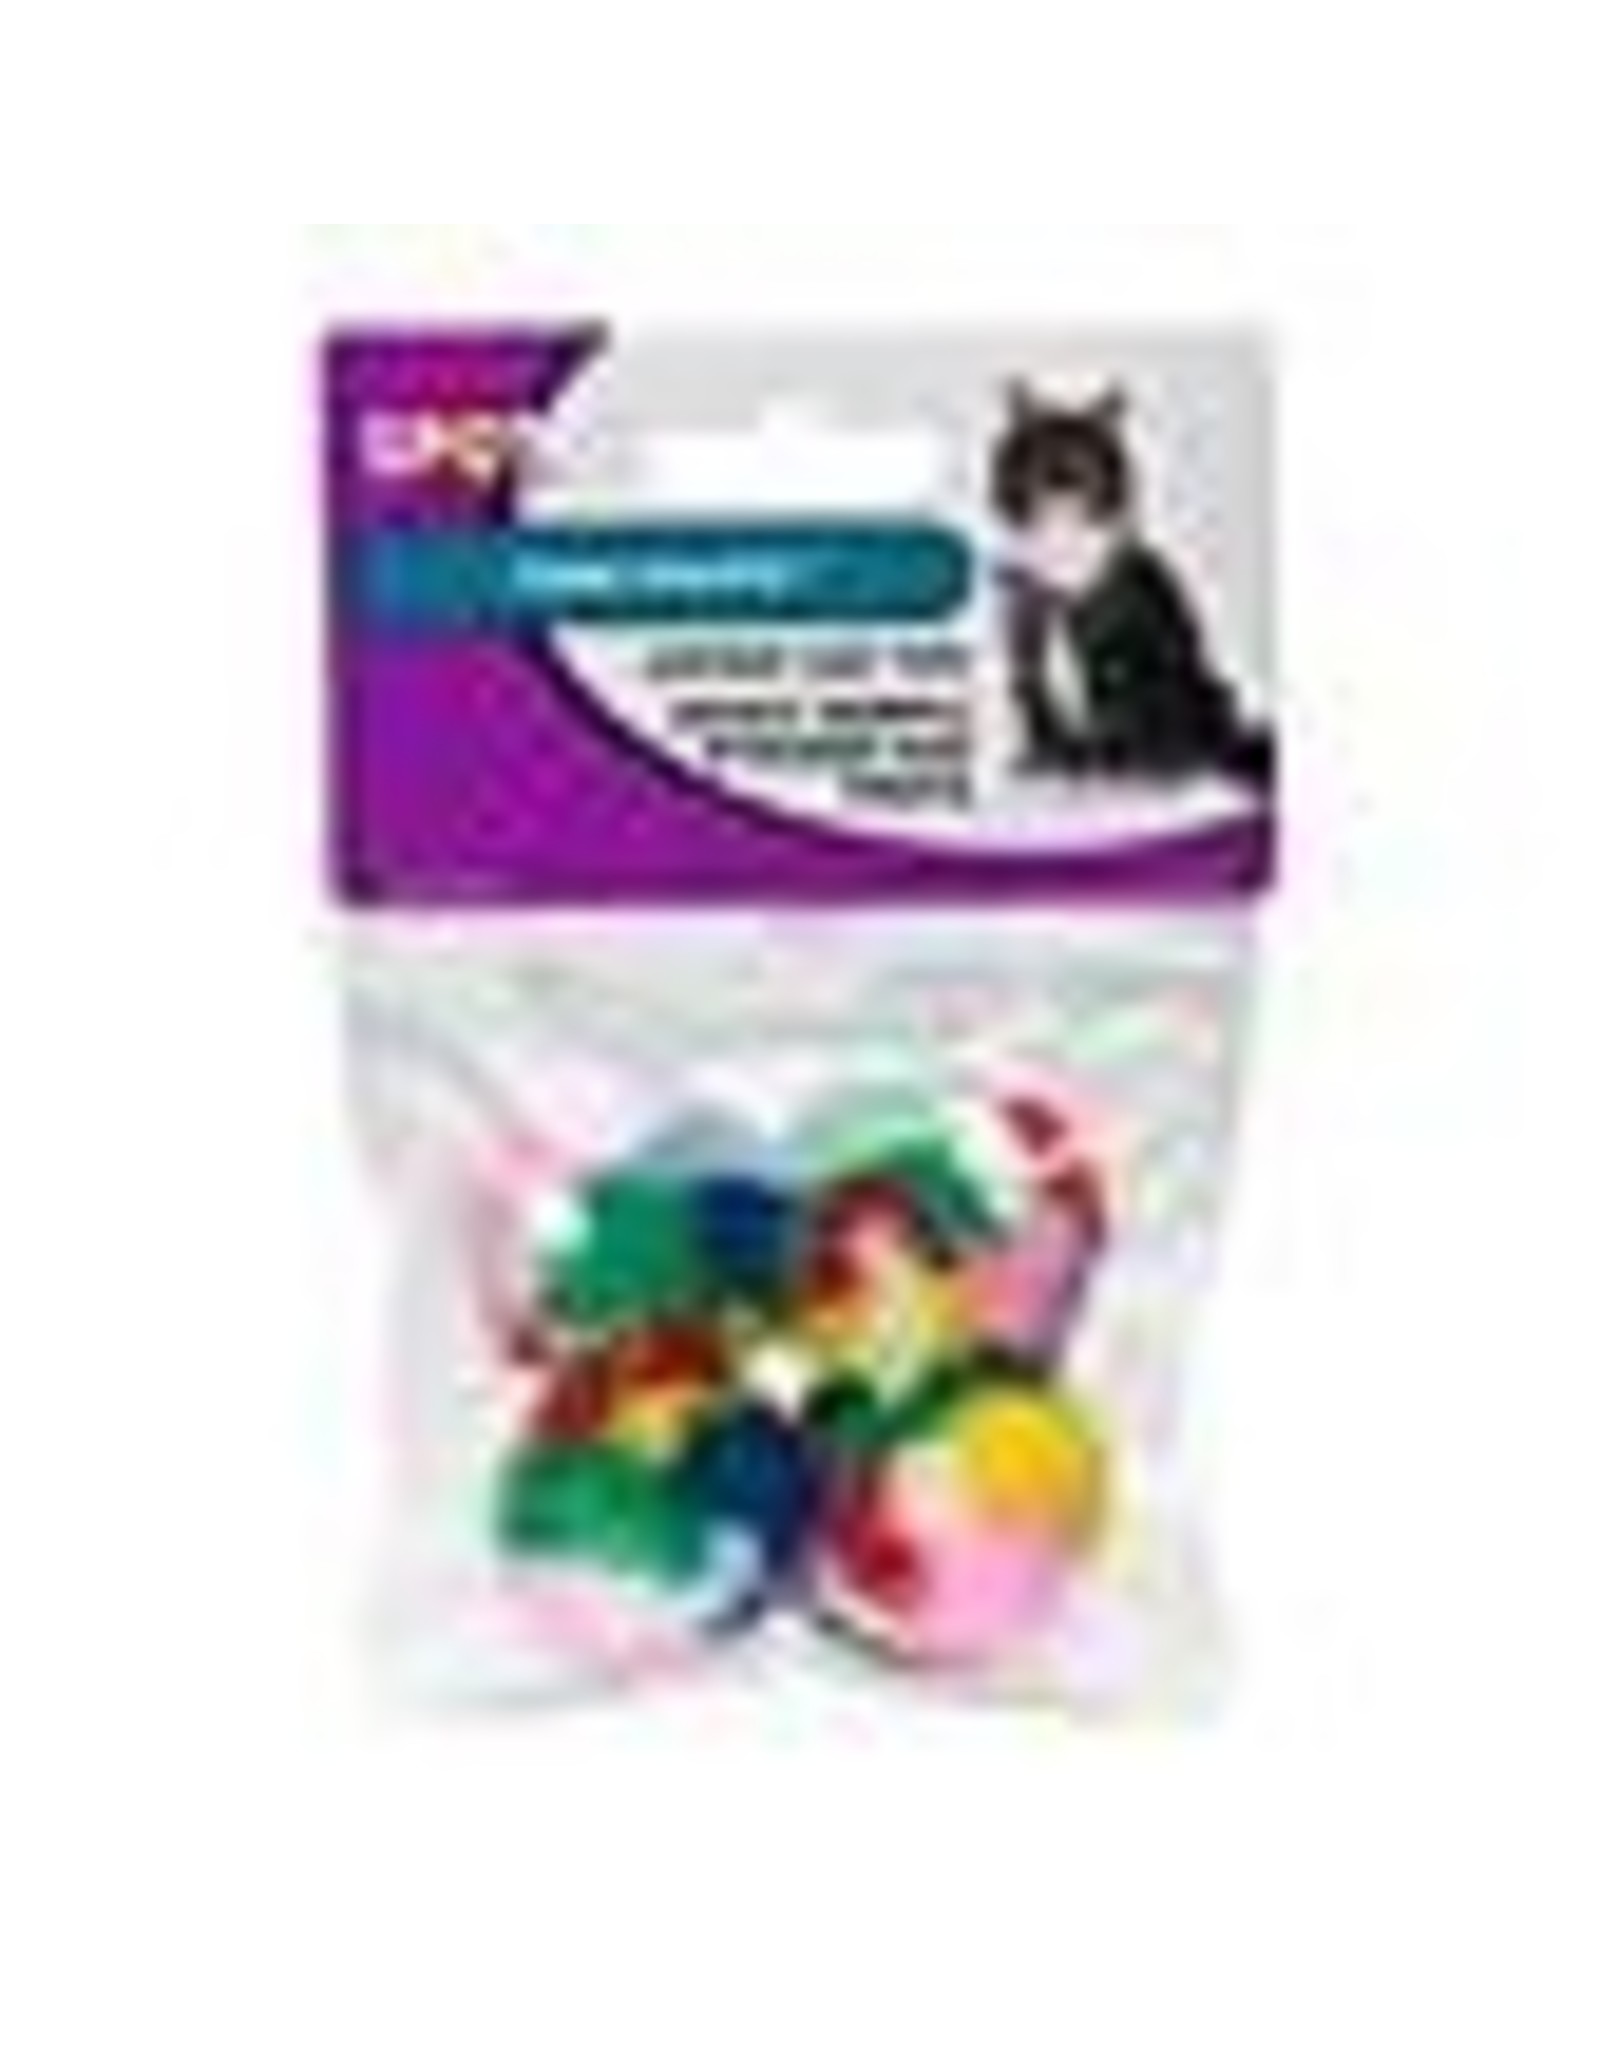 Spot - Ethical Pet Products Kitty Yarn Puffs 4 Small Balls | Cat